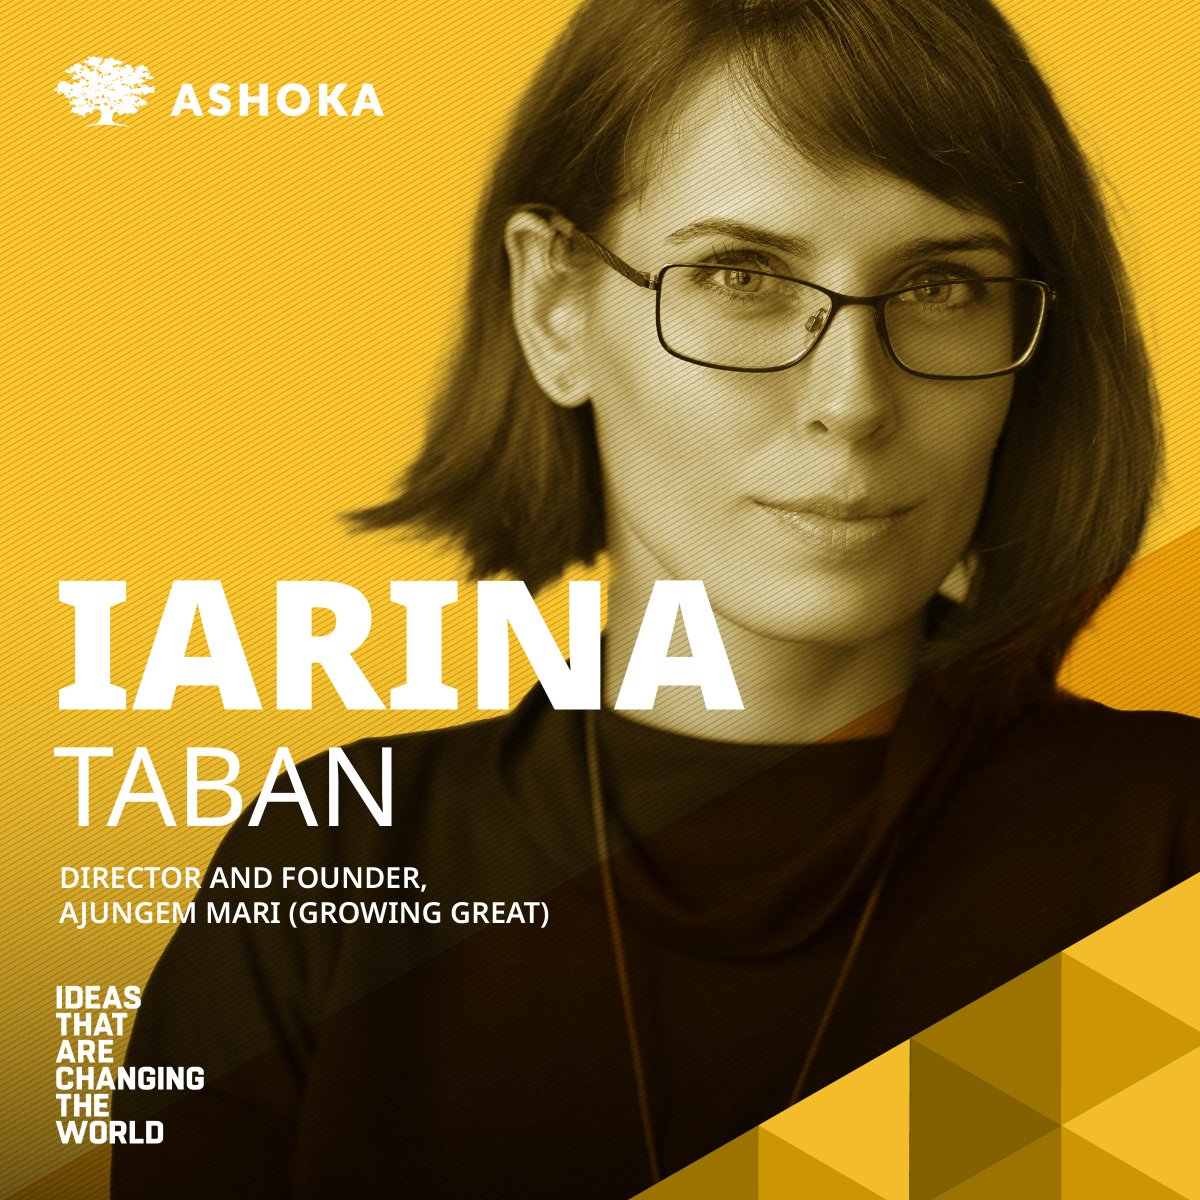 Romania. End of communism. The overcrowded orphanages shock the world. #AshokaFellow Iarina Taban. She built a network to serve the institutionalized youth, changing the system and lives. ow.ly/n65K50O2UuZ

Ashoka’s #2022LeadingSocialEntrepreneurs: ow.ly/4oL150O2Uv0